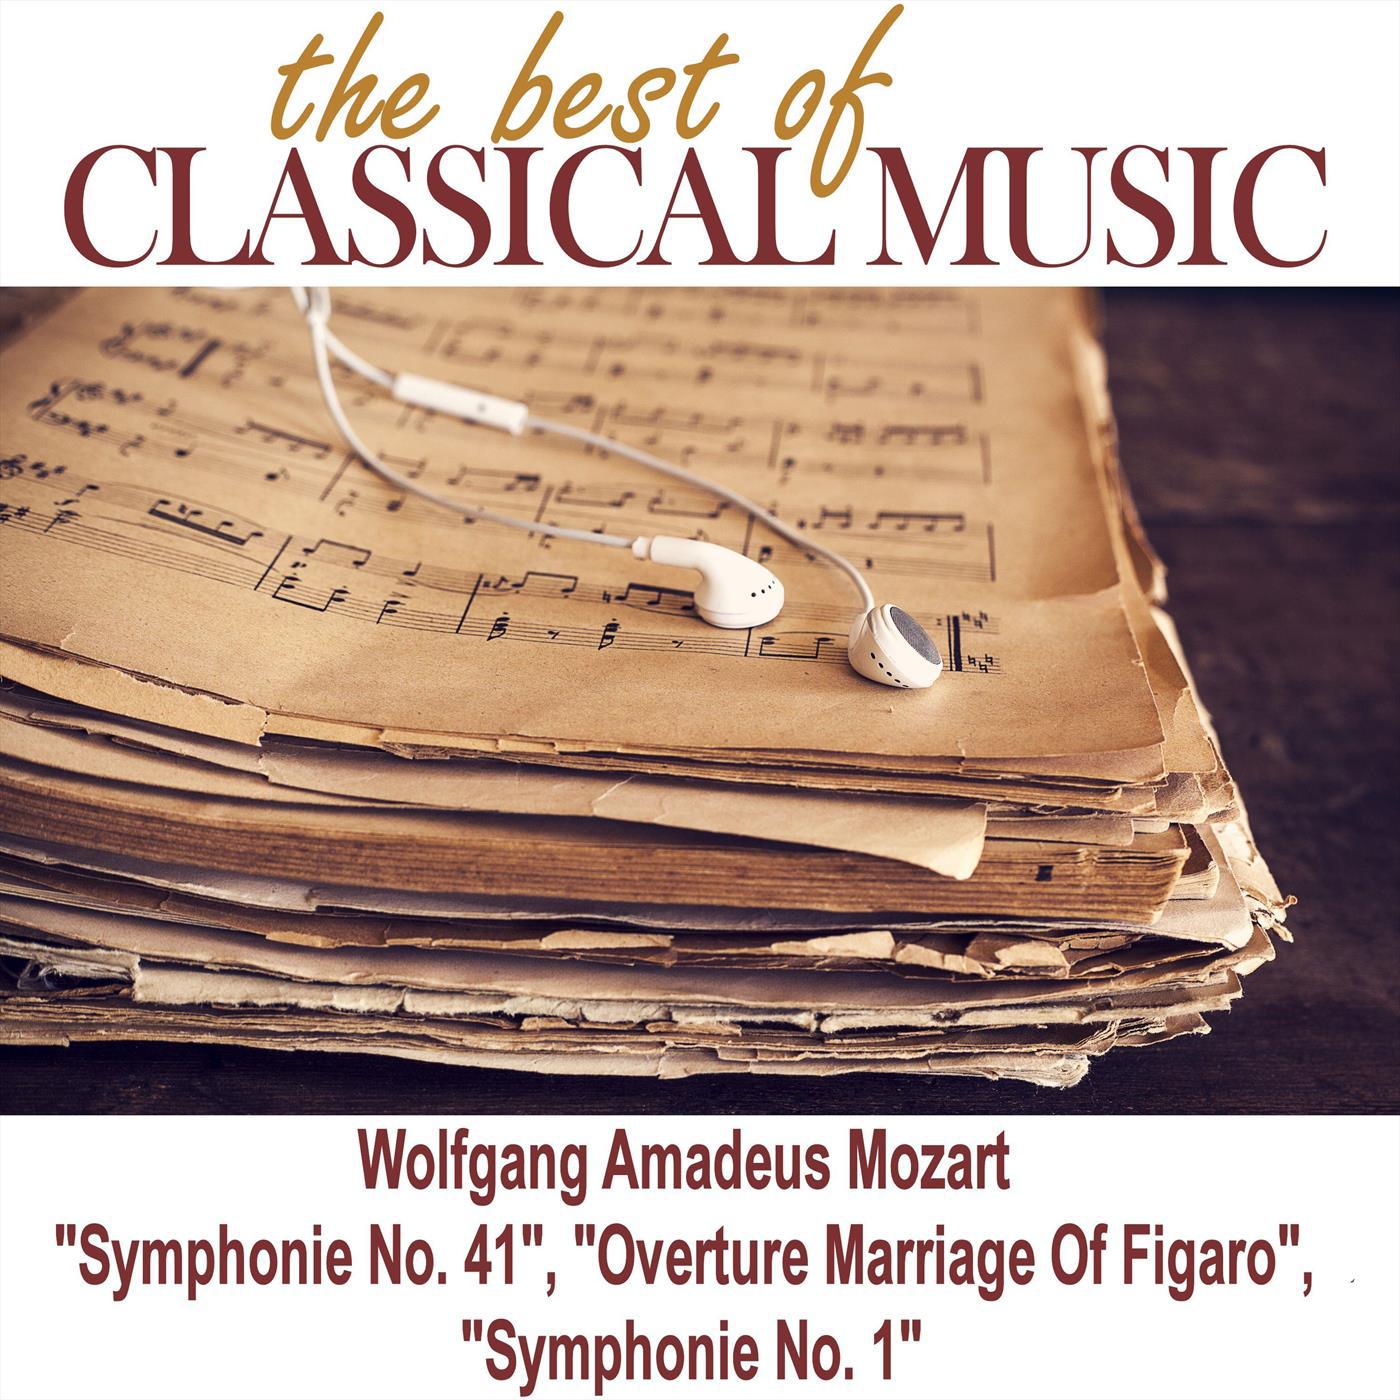 The Best of Classical Music / Wolfgang Amadeus Mozart "Symphonie No. 41", "Overture Marriage Of Figaro", "Symphonie No. 1"